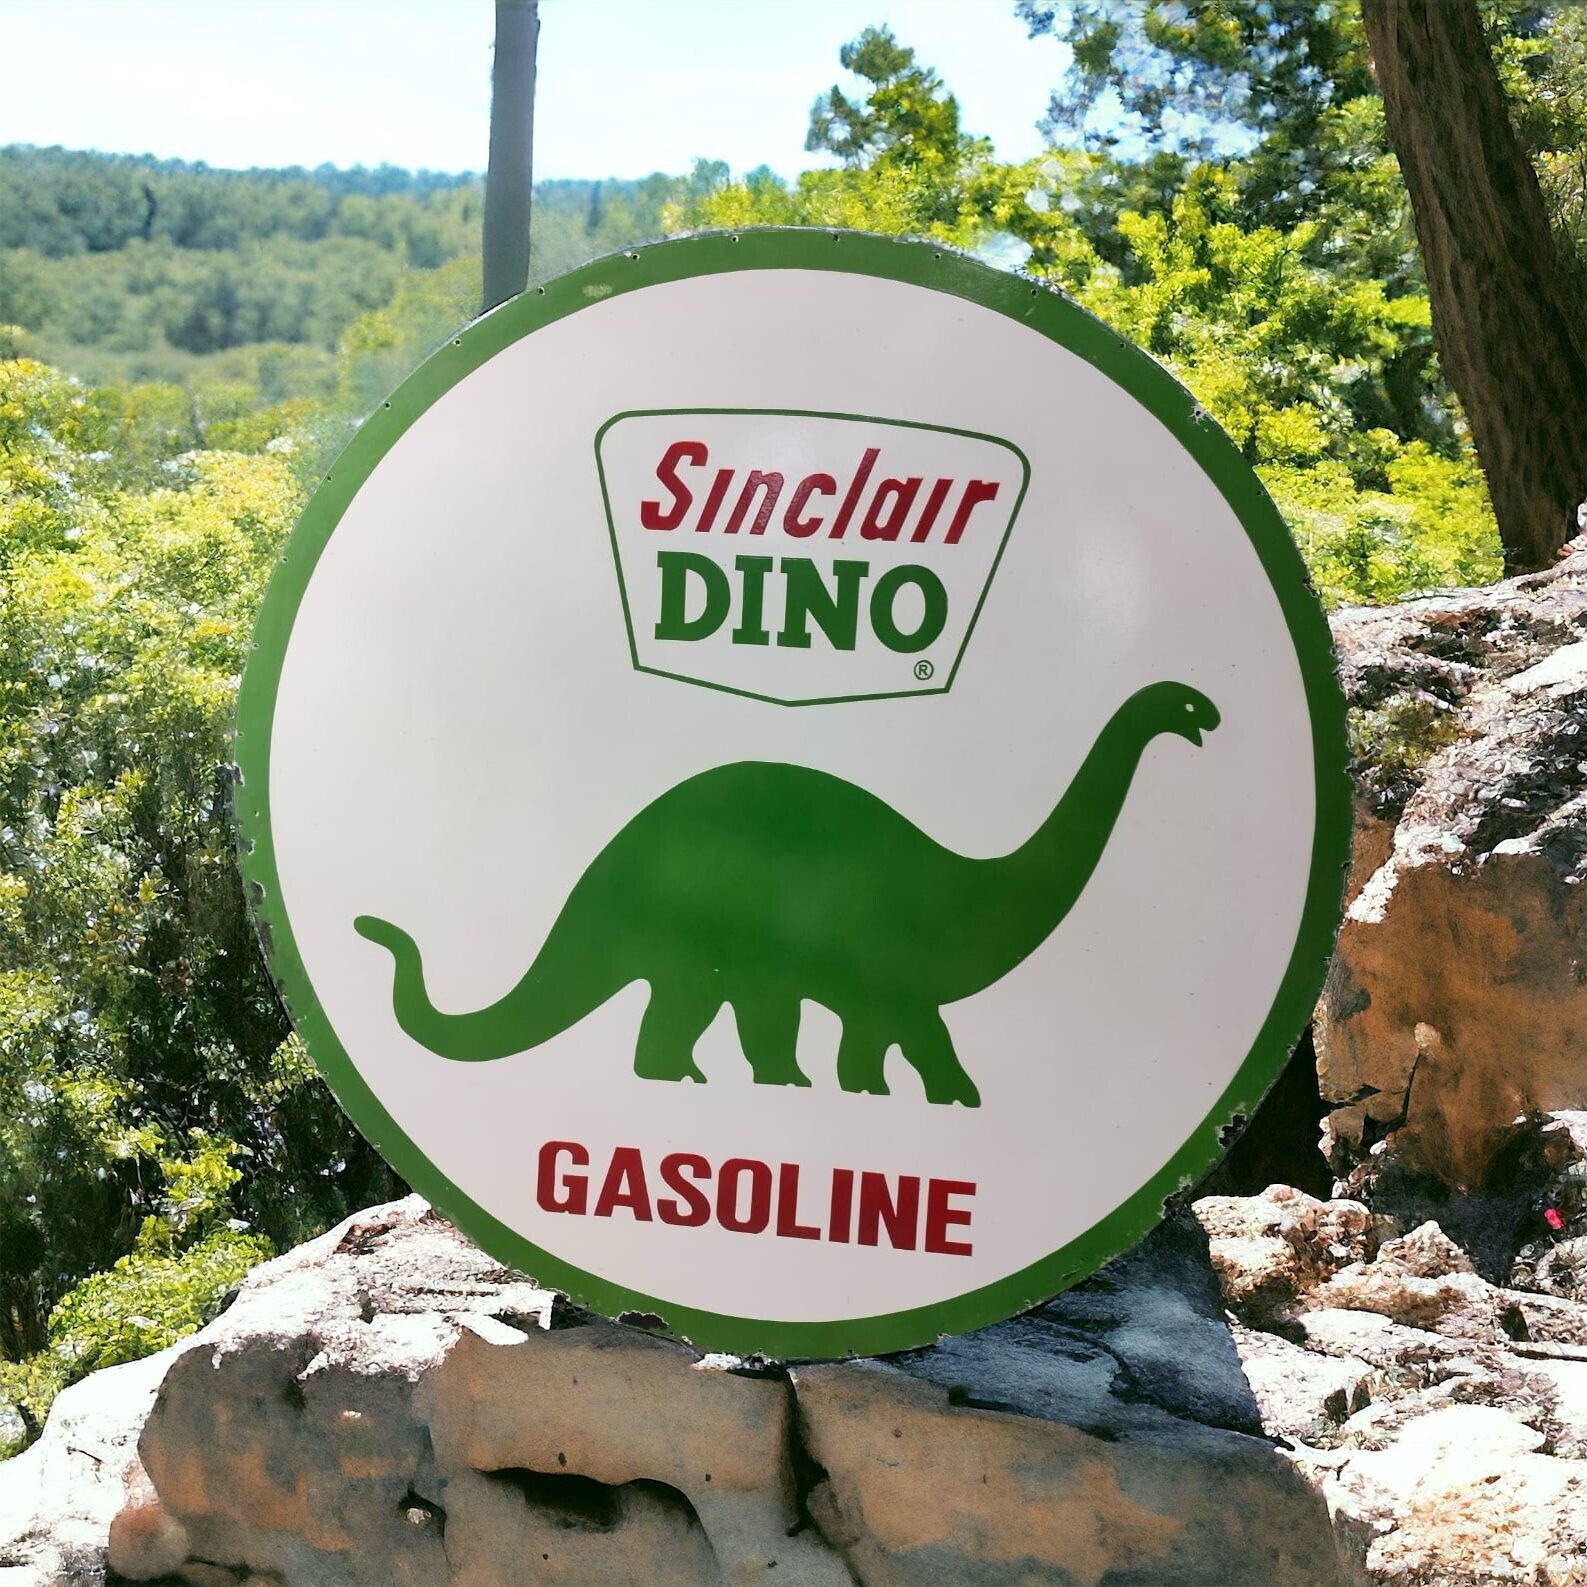 SINCLAIR DINO LARGE 6 FEET ROUND ADVERTISE PORCELAIN ENAMEL SIGN 72 INCHES DSP